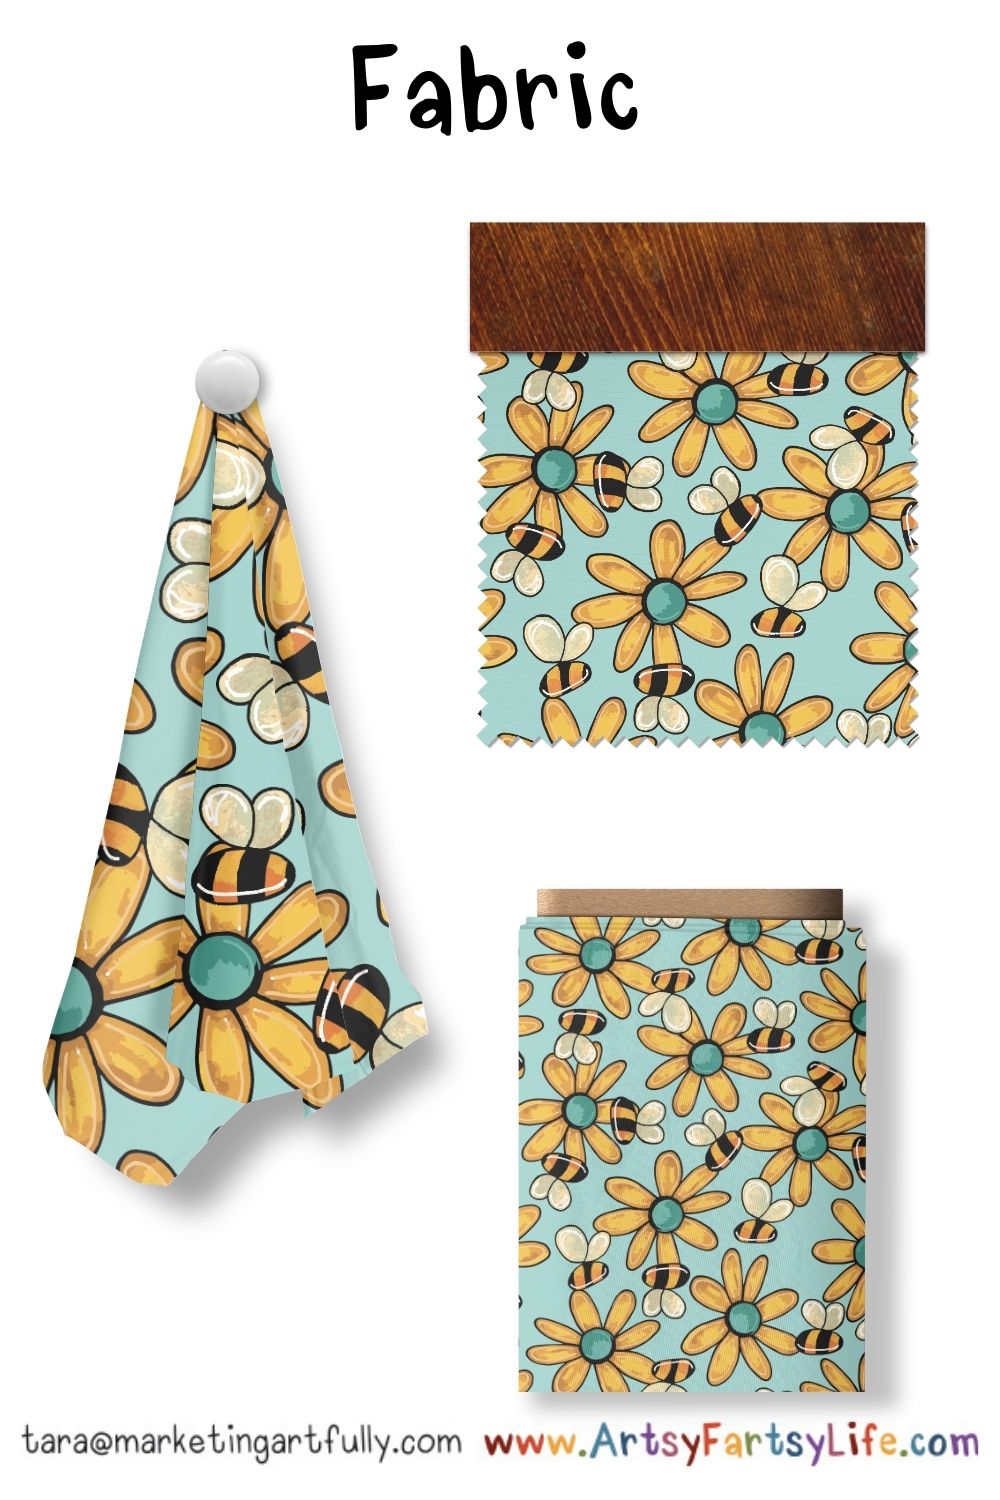 Lady Bee Bear Surface Design for Fabric